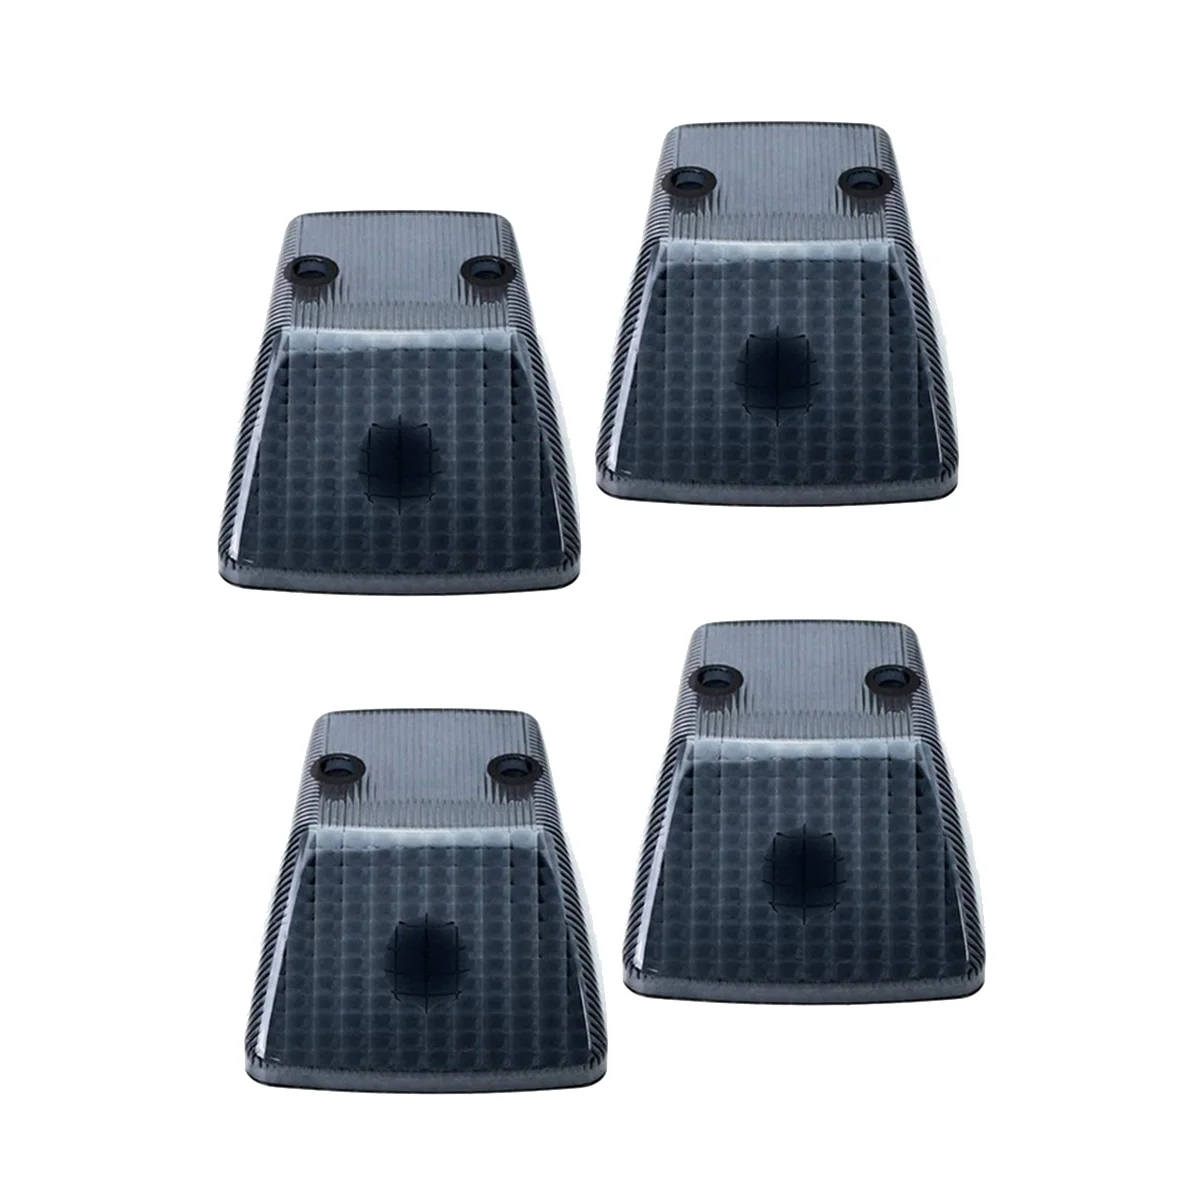 

4Pcs Front Wing Turn Signal Lens Cover A4638260057 for Mercedes Benz W463 G-Class G500 G550 1986-2018 Corner Light Shell